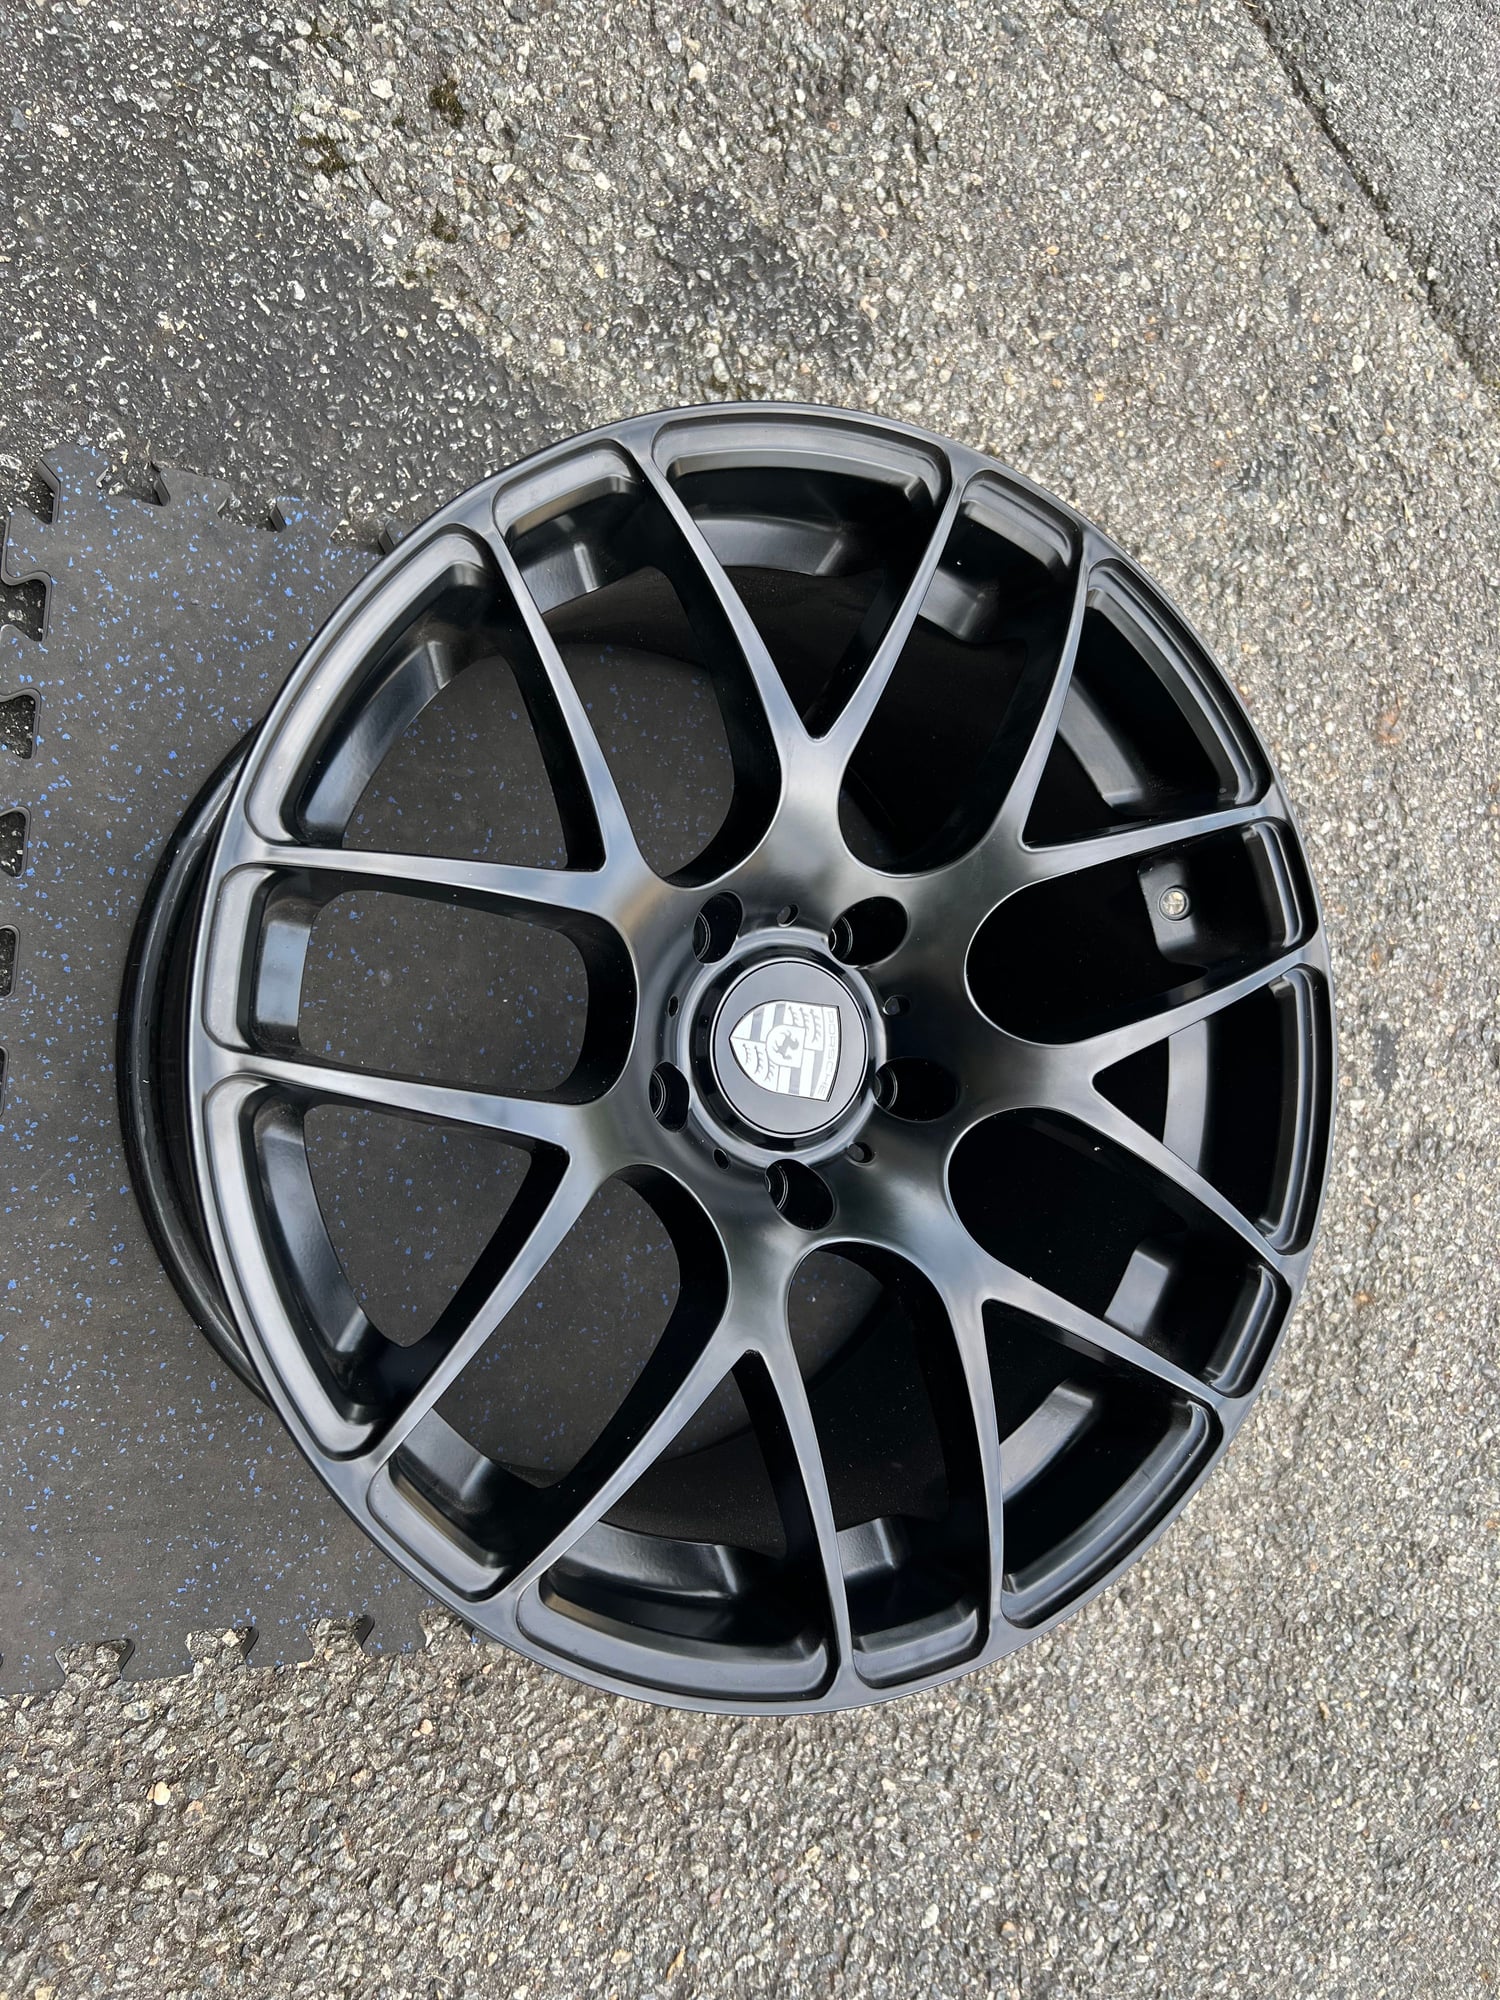 Wheels and Tires/Axles - 997.1 Turbo Wheels - Used - 2007 to 2009 Porsche 911 - East Hanover, NJ 07936, United States